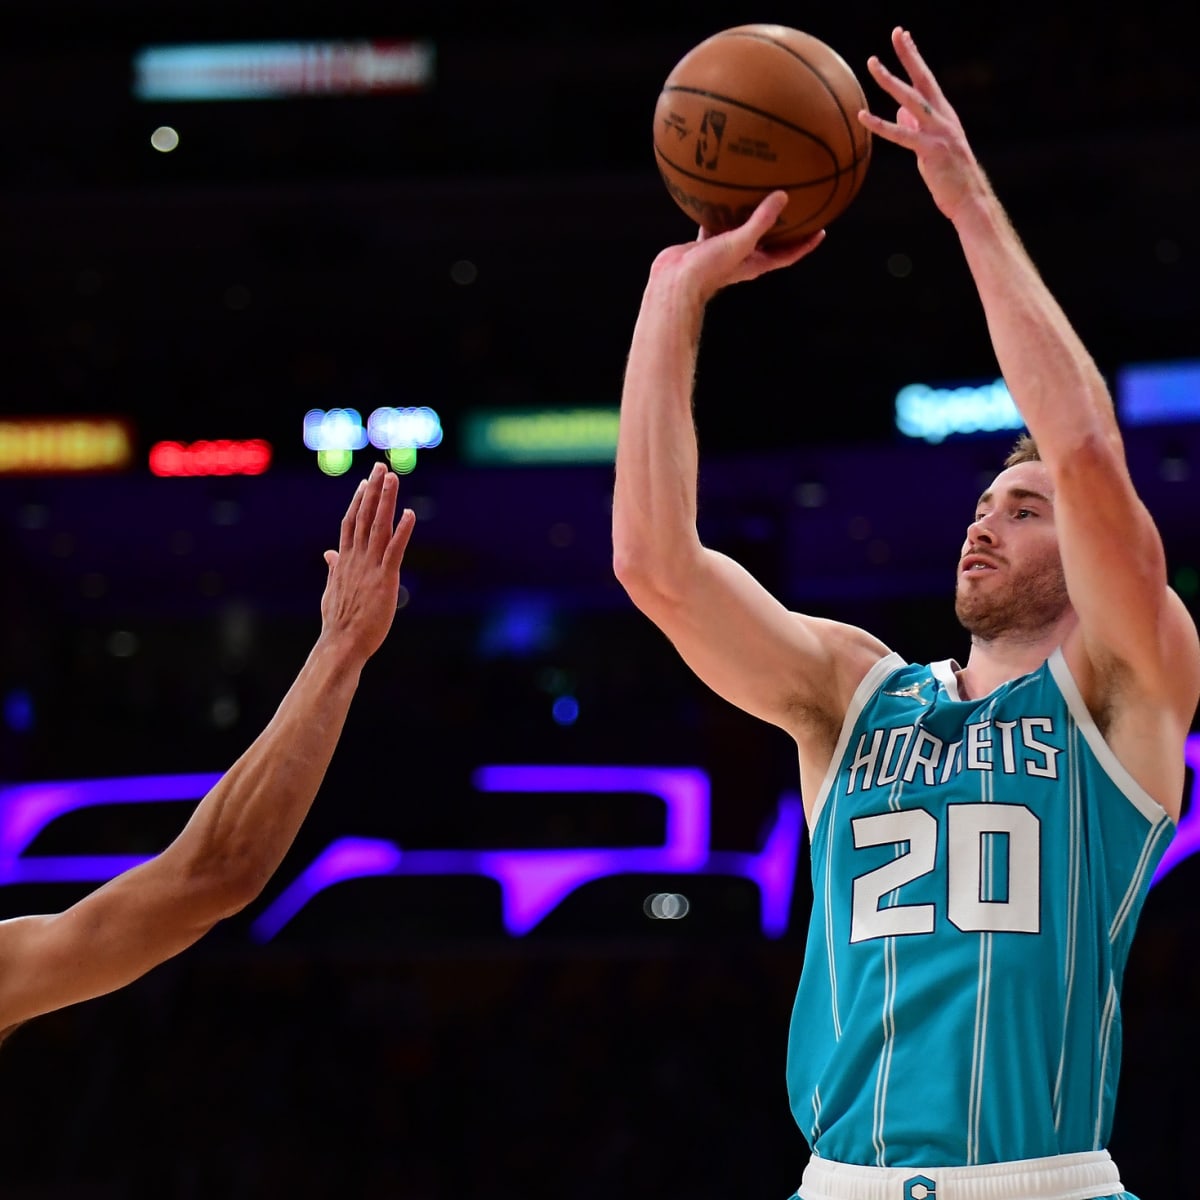 Lakers Rumors: Gordon Hayward's contract viewed as 'deterrent' in trade -  Silver Screen and Roll